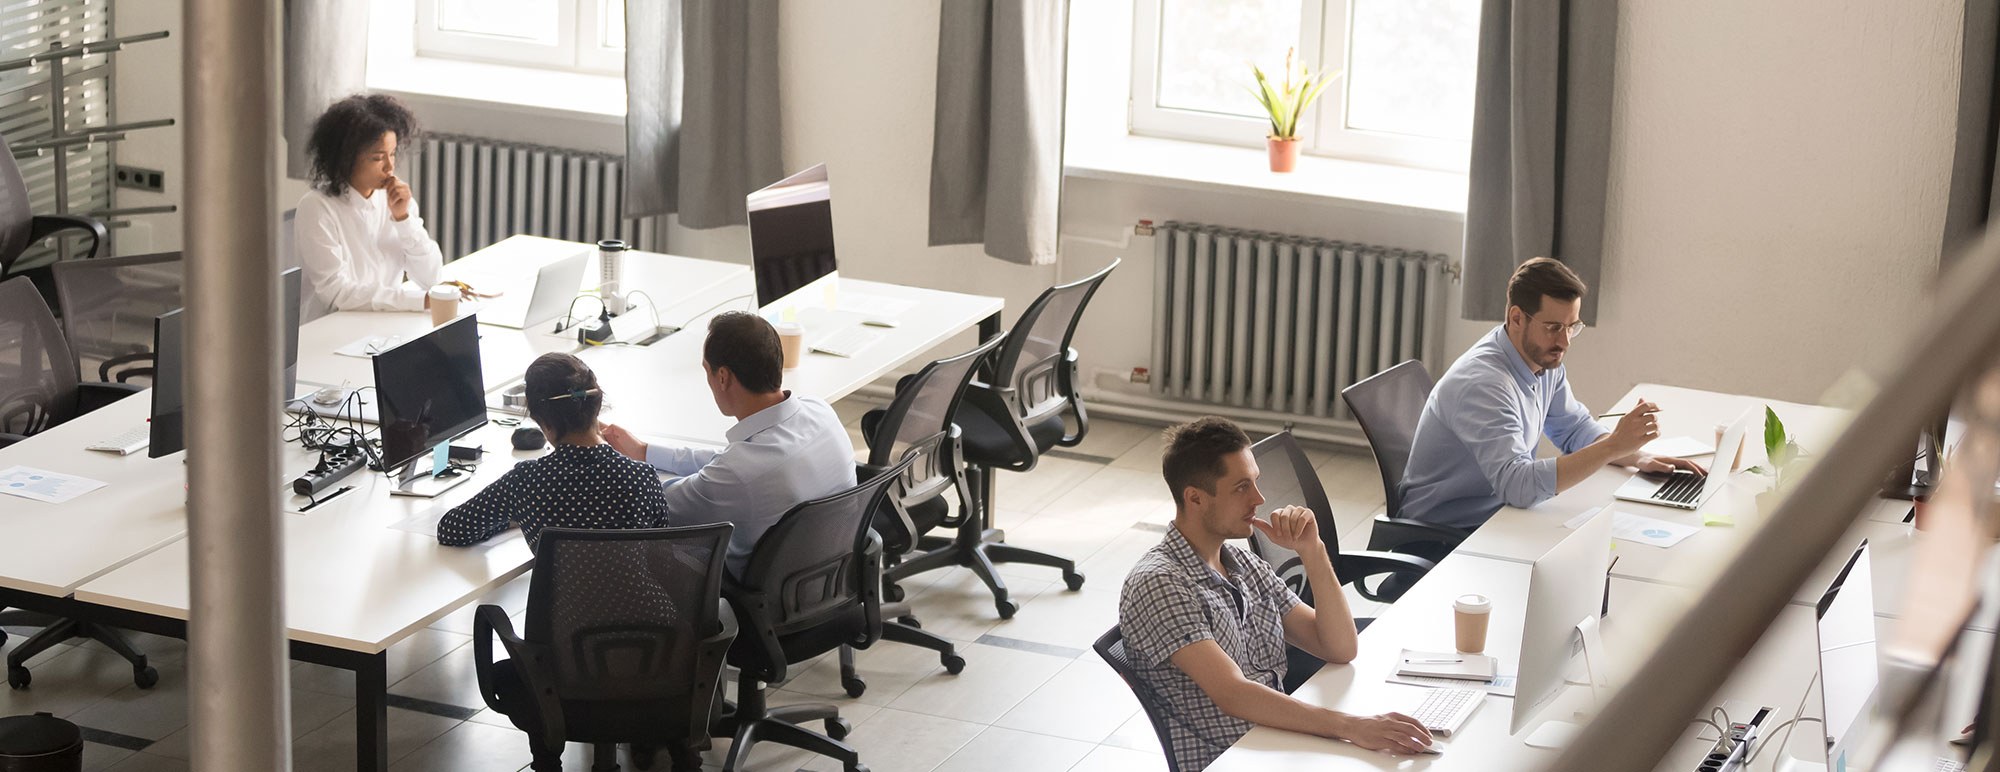 Image of an Open Office with people working at desks